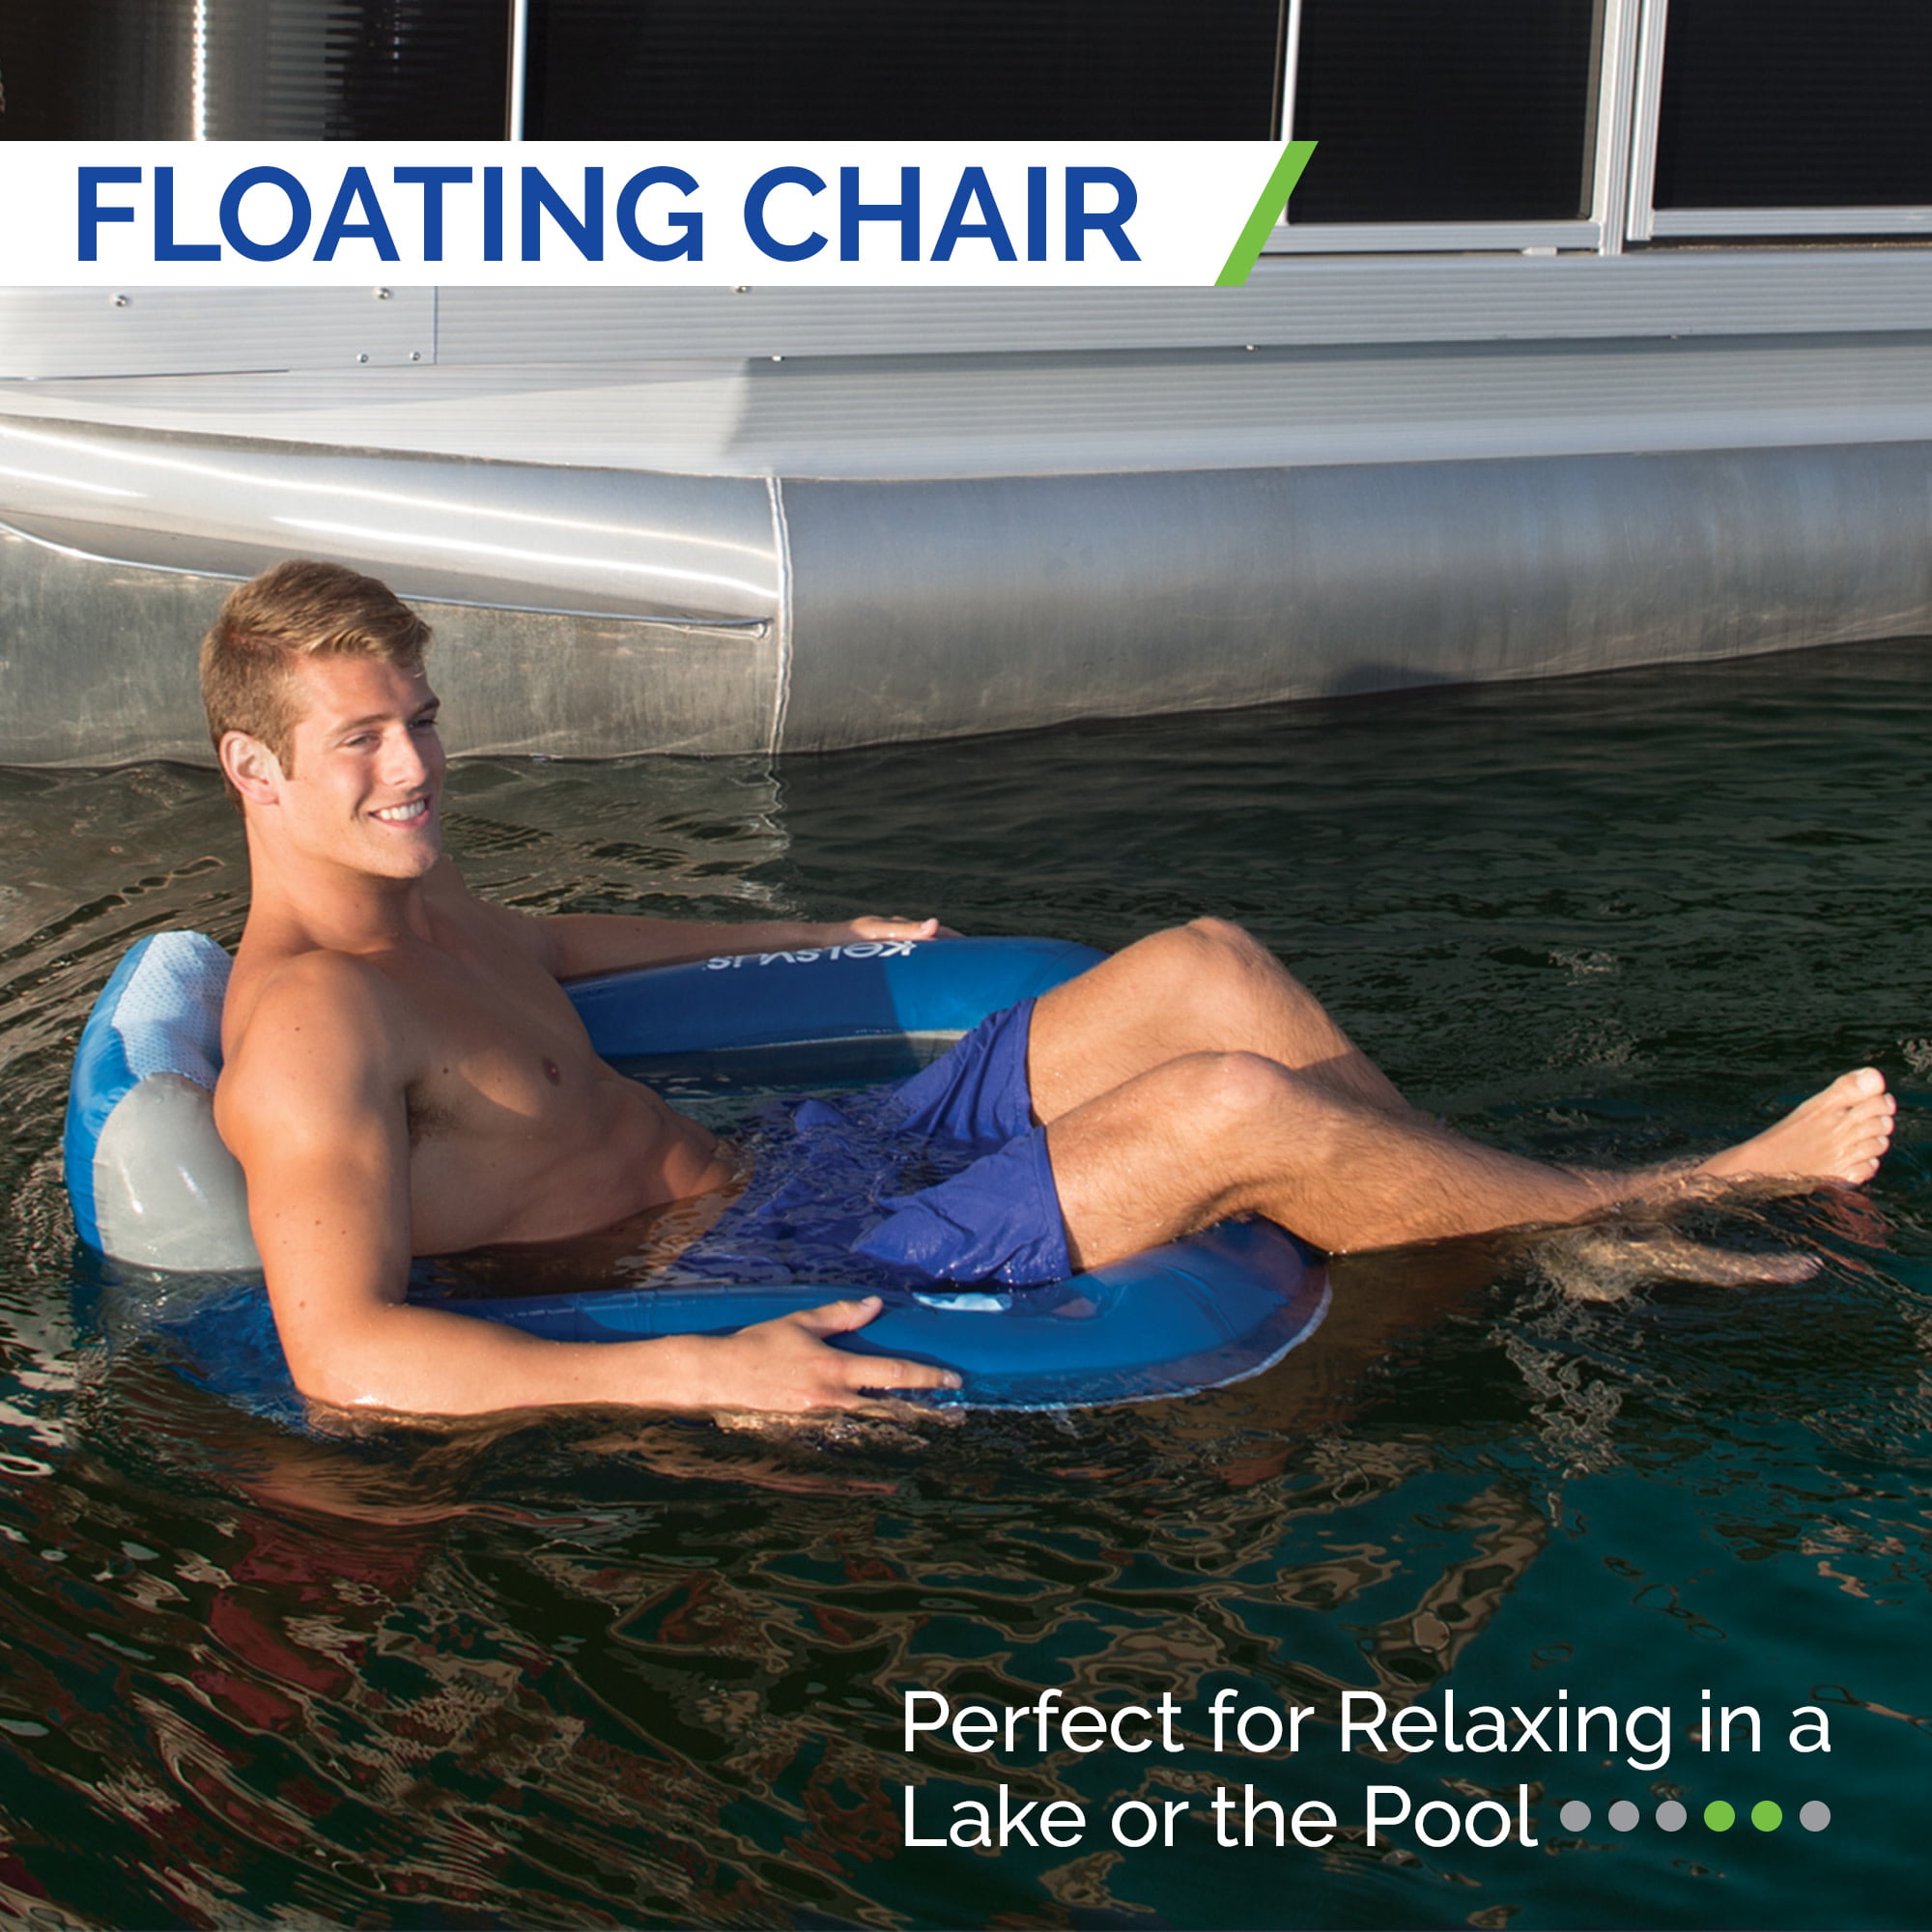 Open Box Kelsyus Floating Pool Lounger Inflatable Chair w/ Cup Holder - Blue